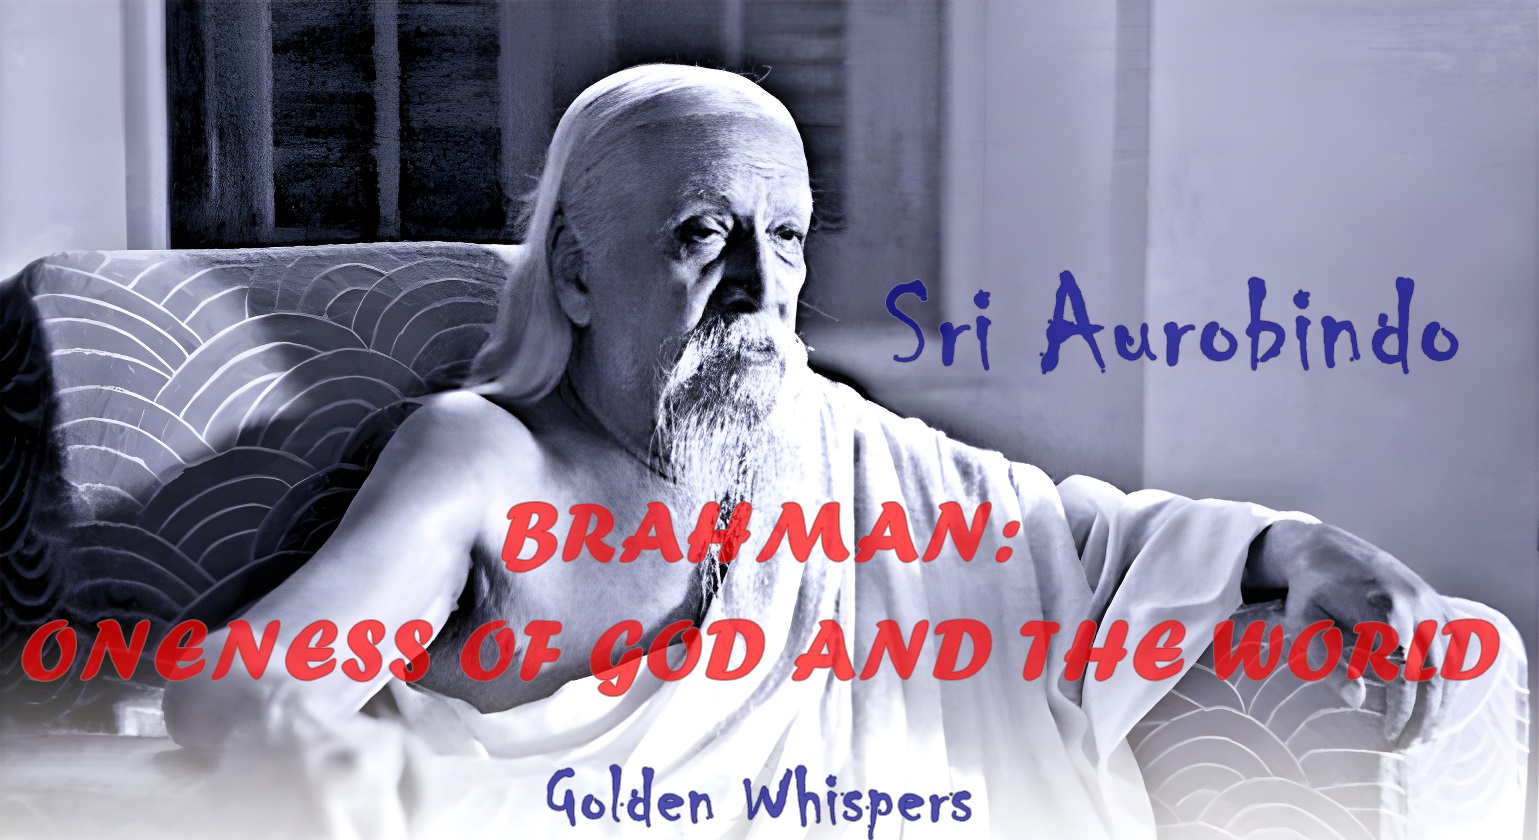 BRAHMAN: ONENESS OF GOD AND THE WORLD